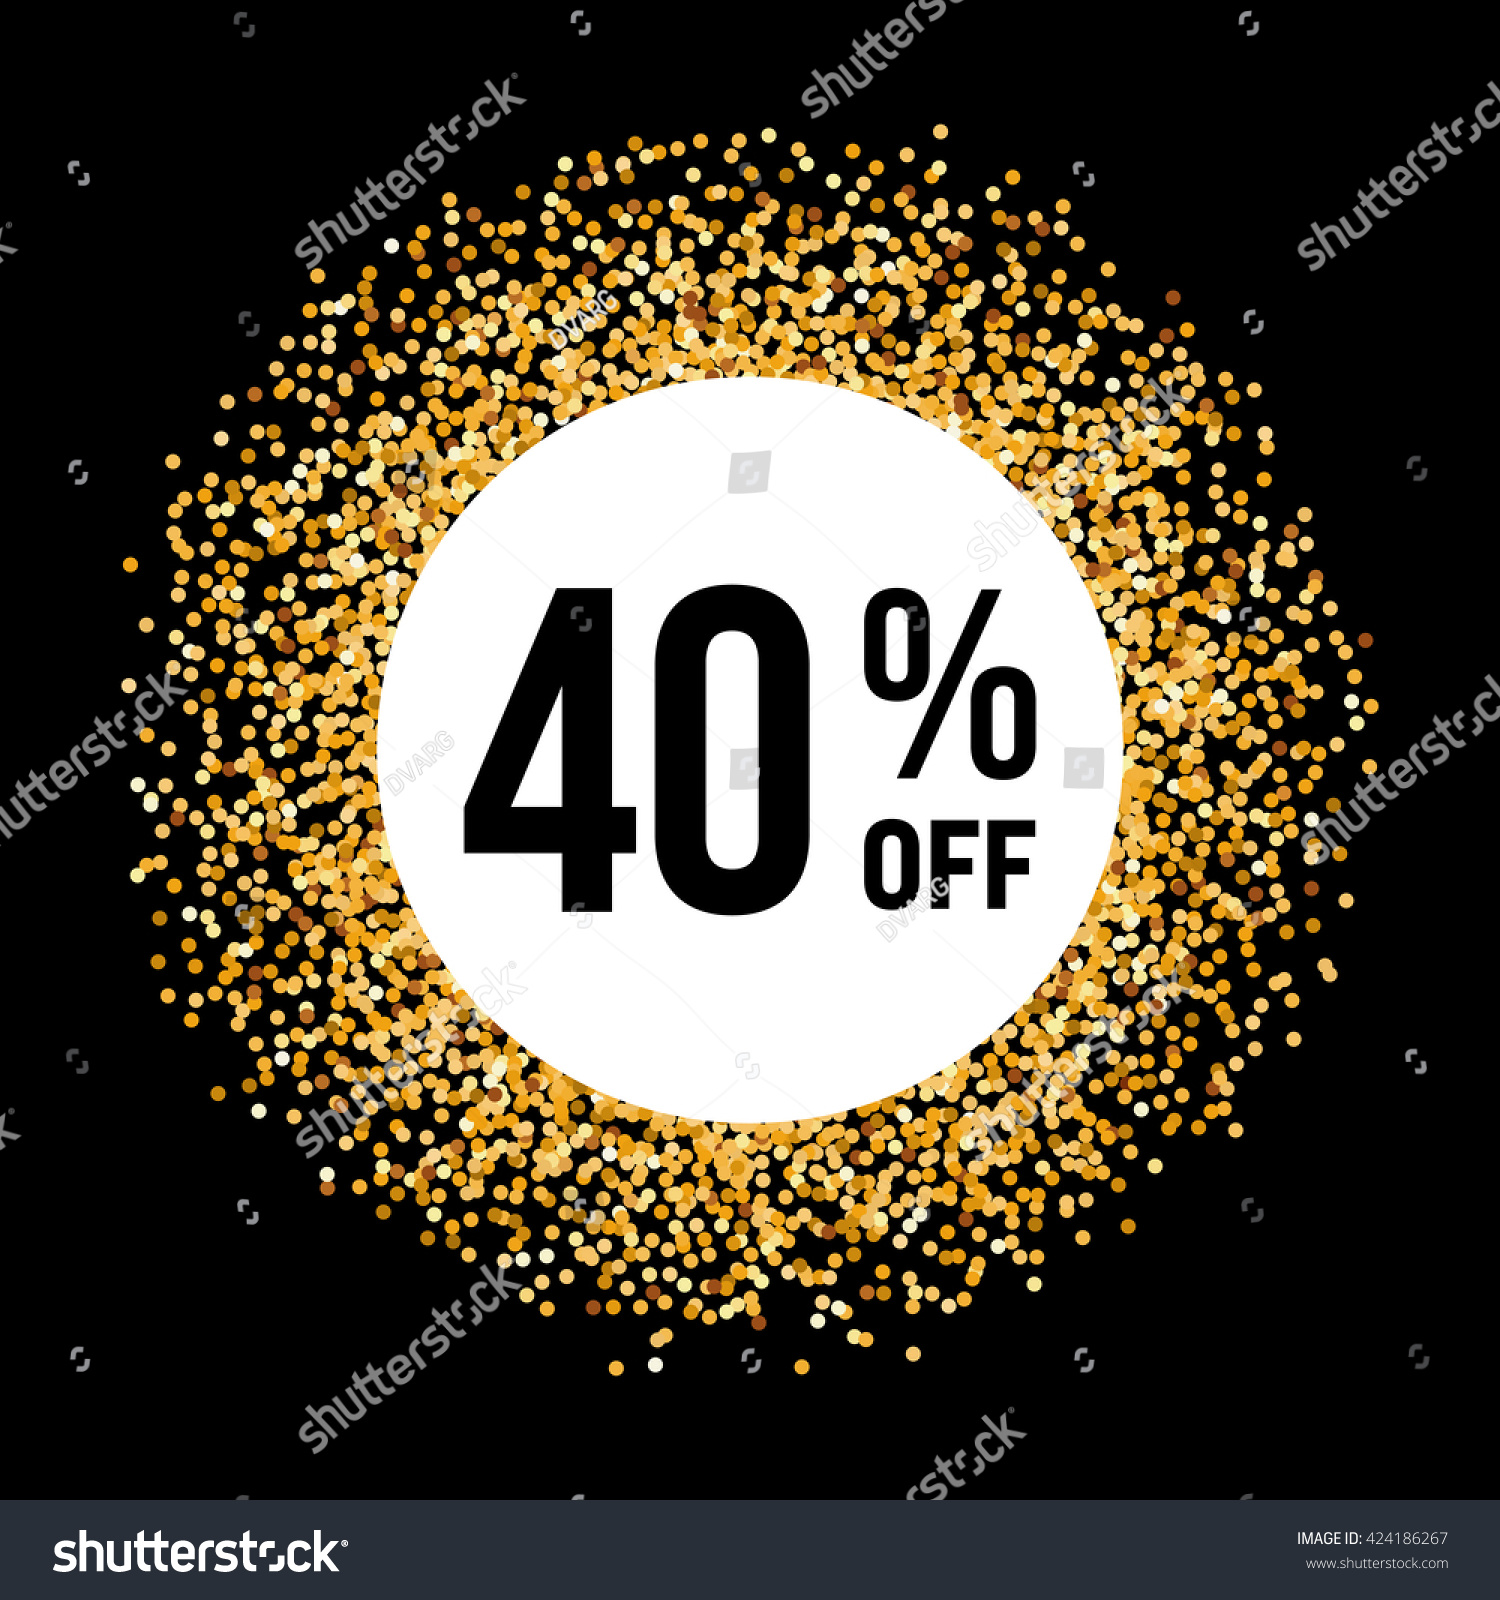 Raster version. Golden Circle Frame on Black Background with Discount Forty Percent
 #424186267